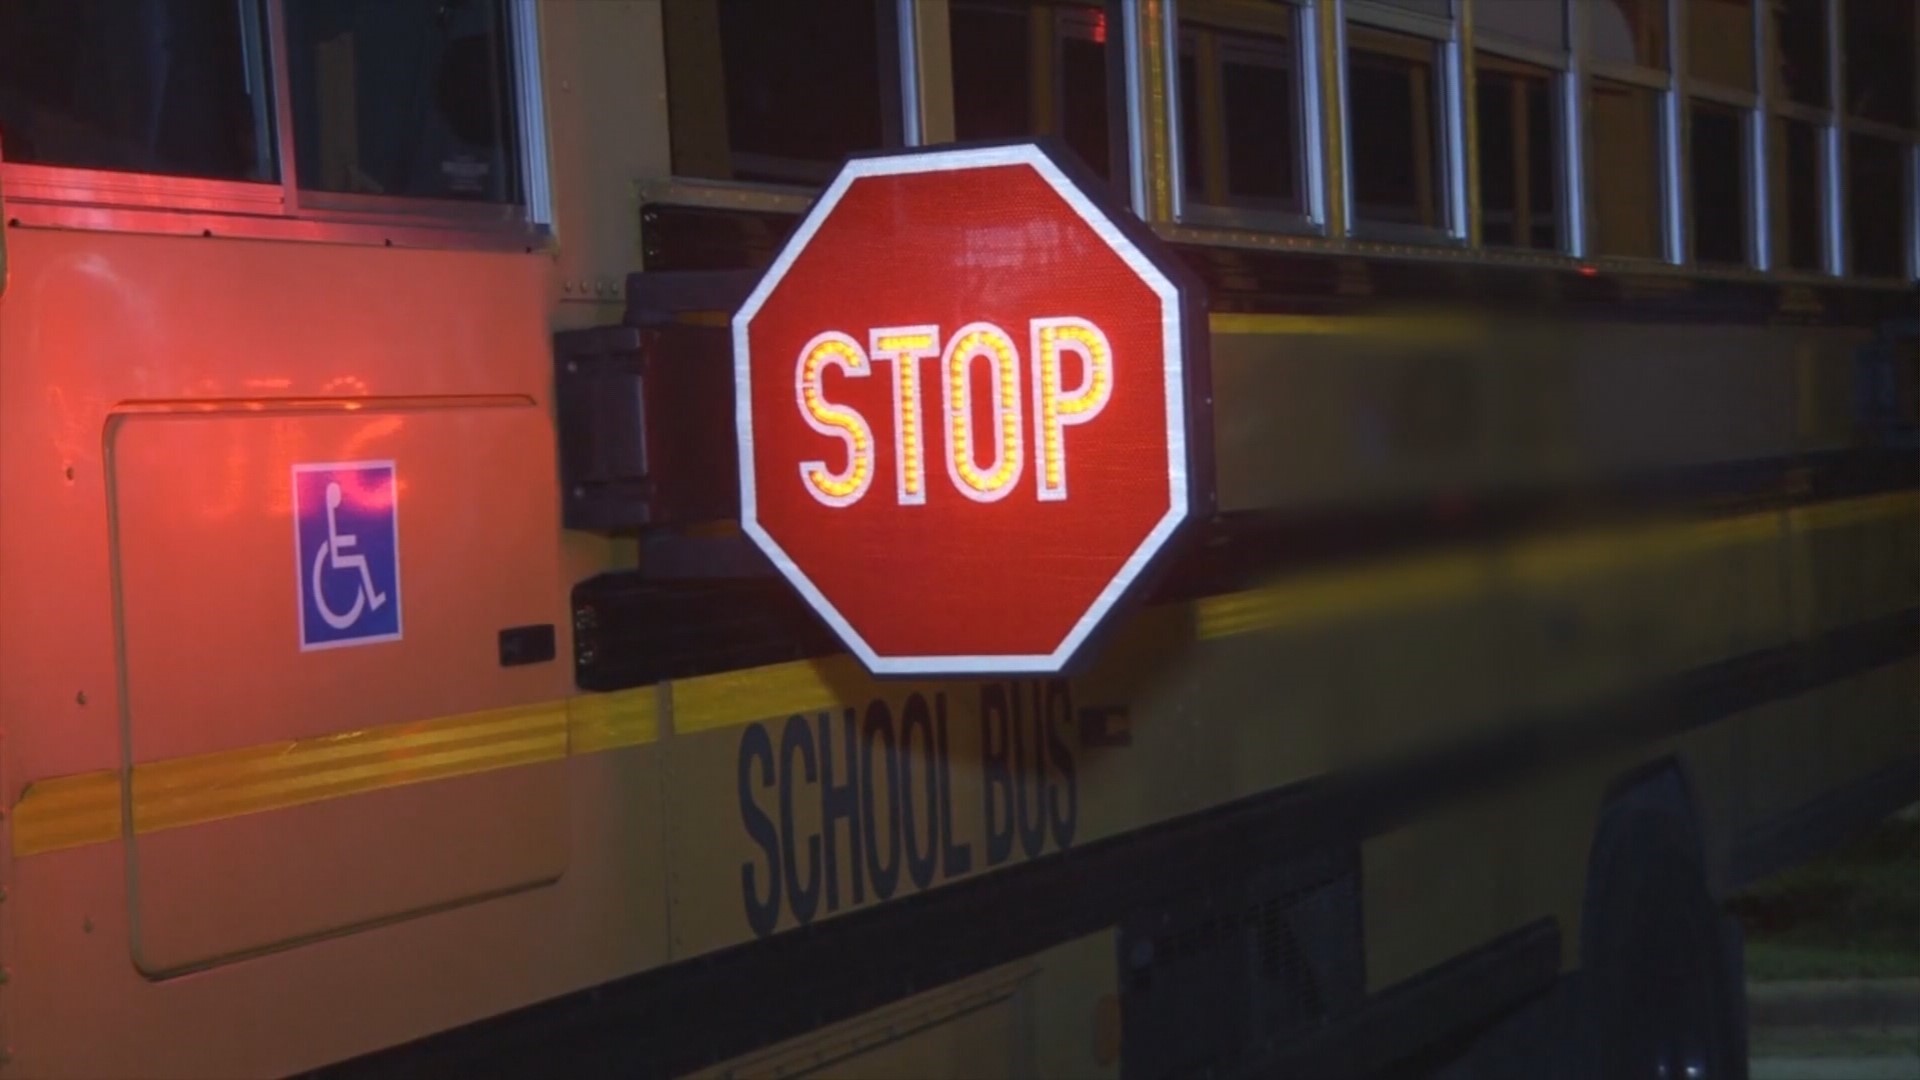 As school starts back up, we're connecting the dots to remind you of the bus rules to keep drivers safe on the road.